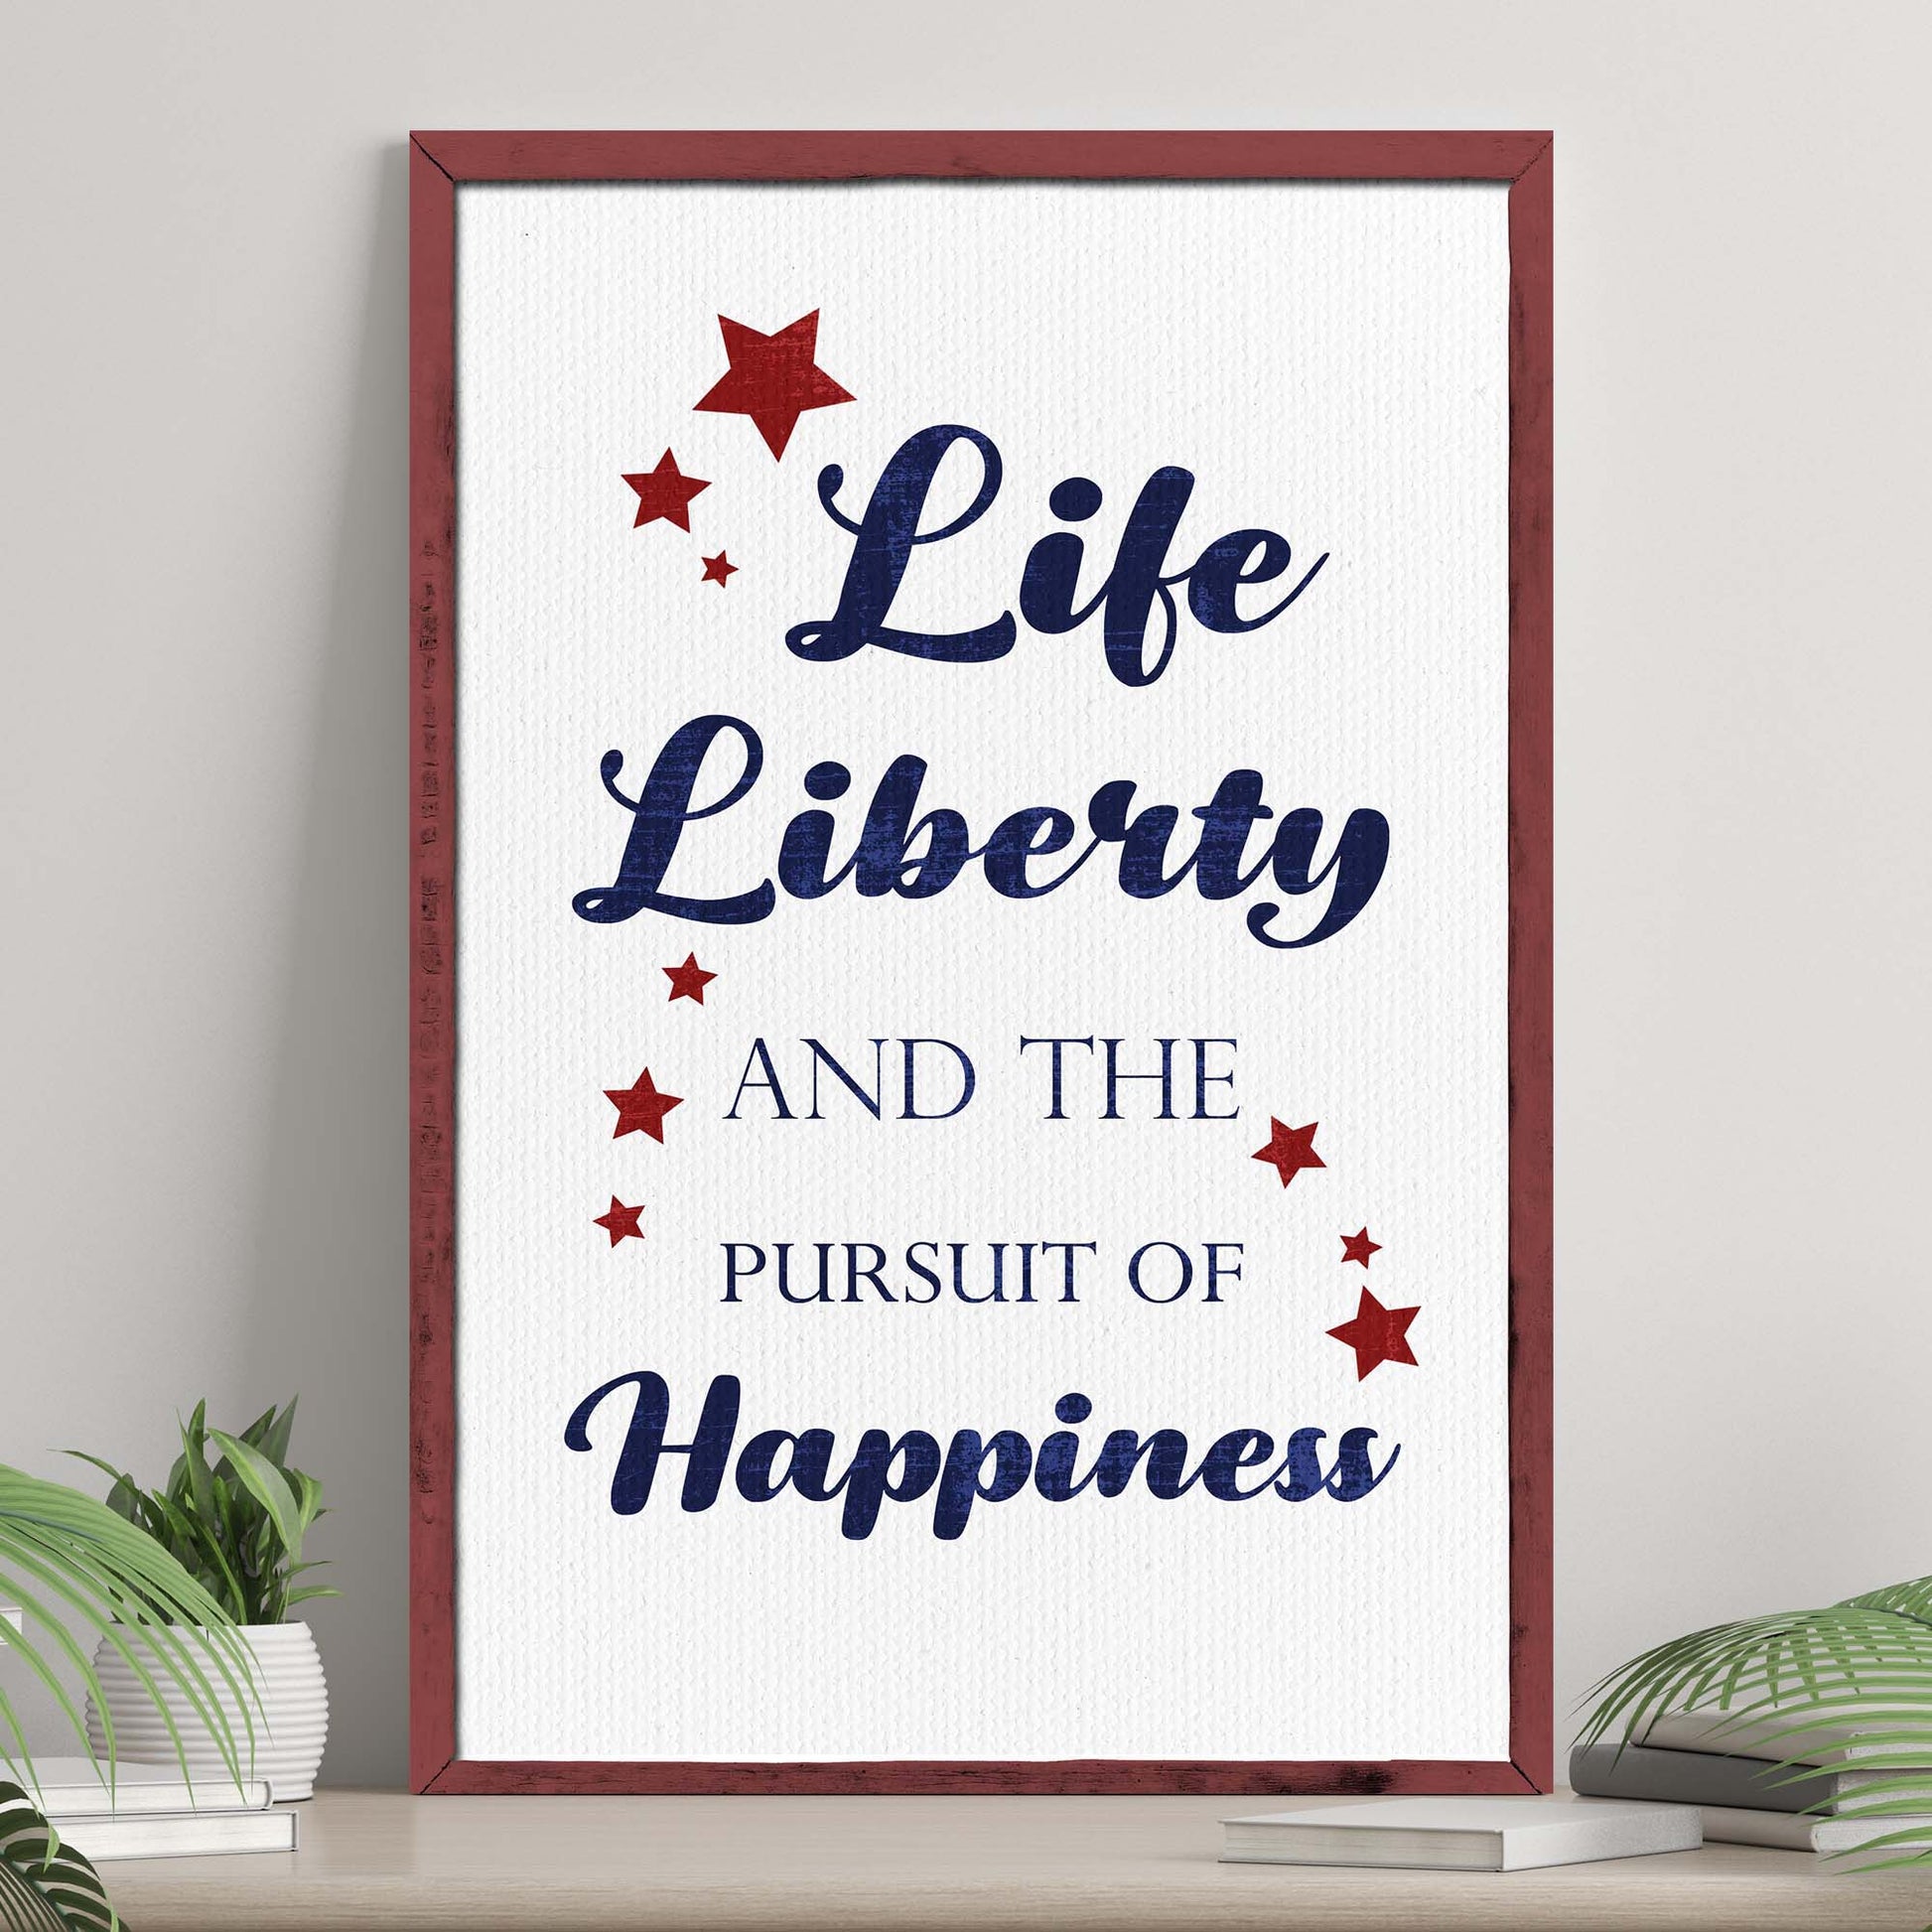 Life, Liberty, And The Pursuit Of Happiness Sign II  - Image by Tailored Canvases